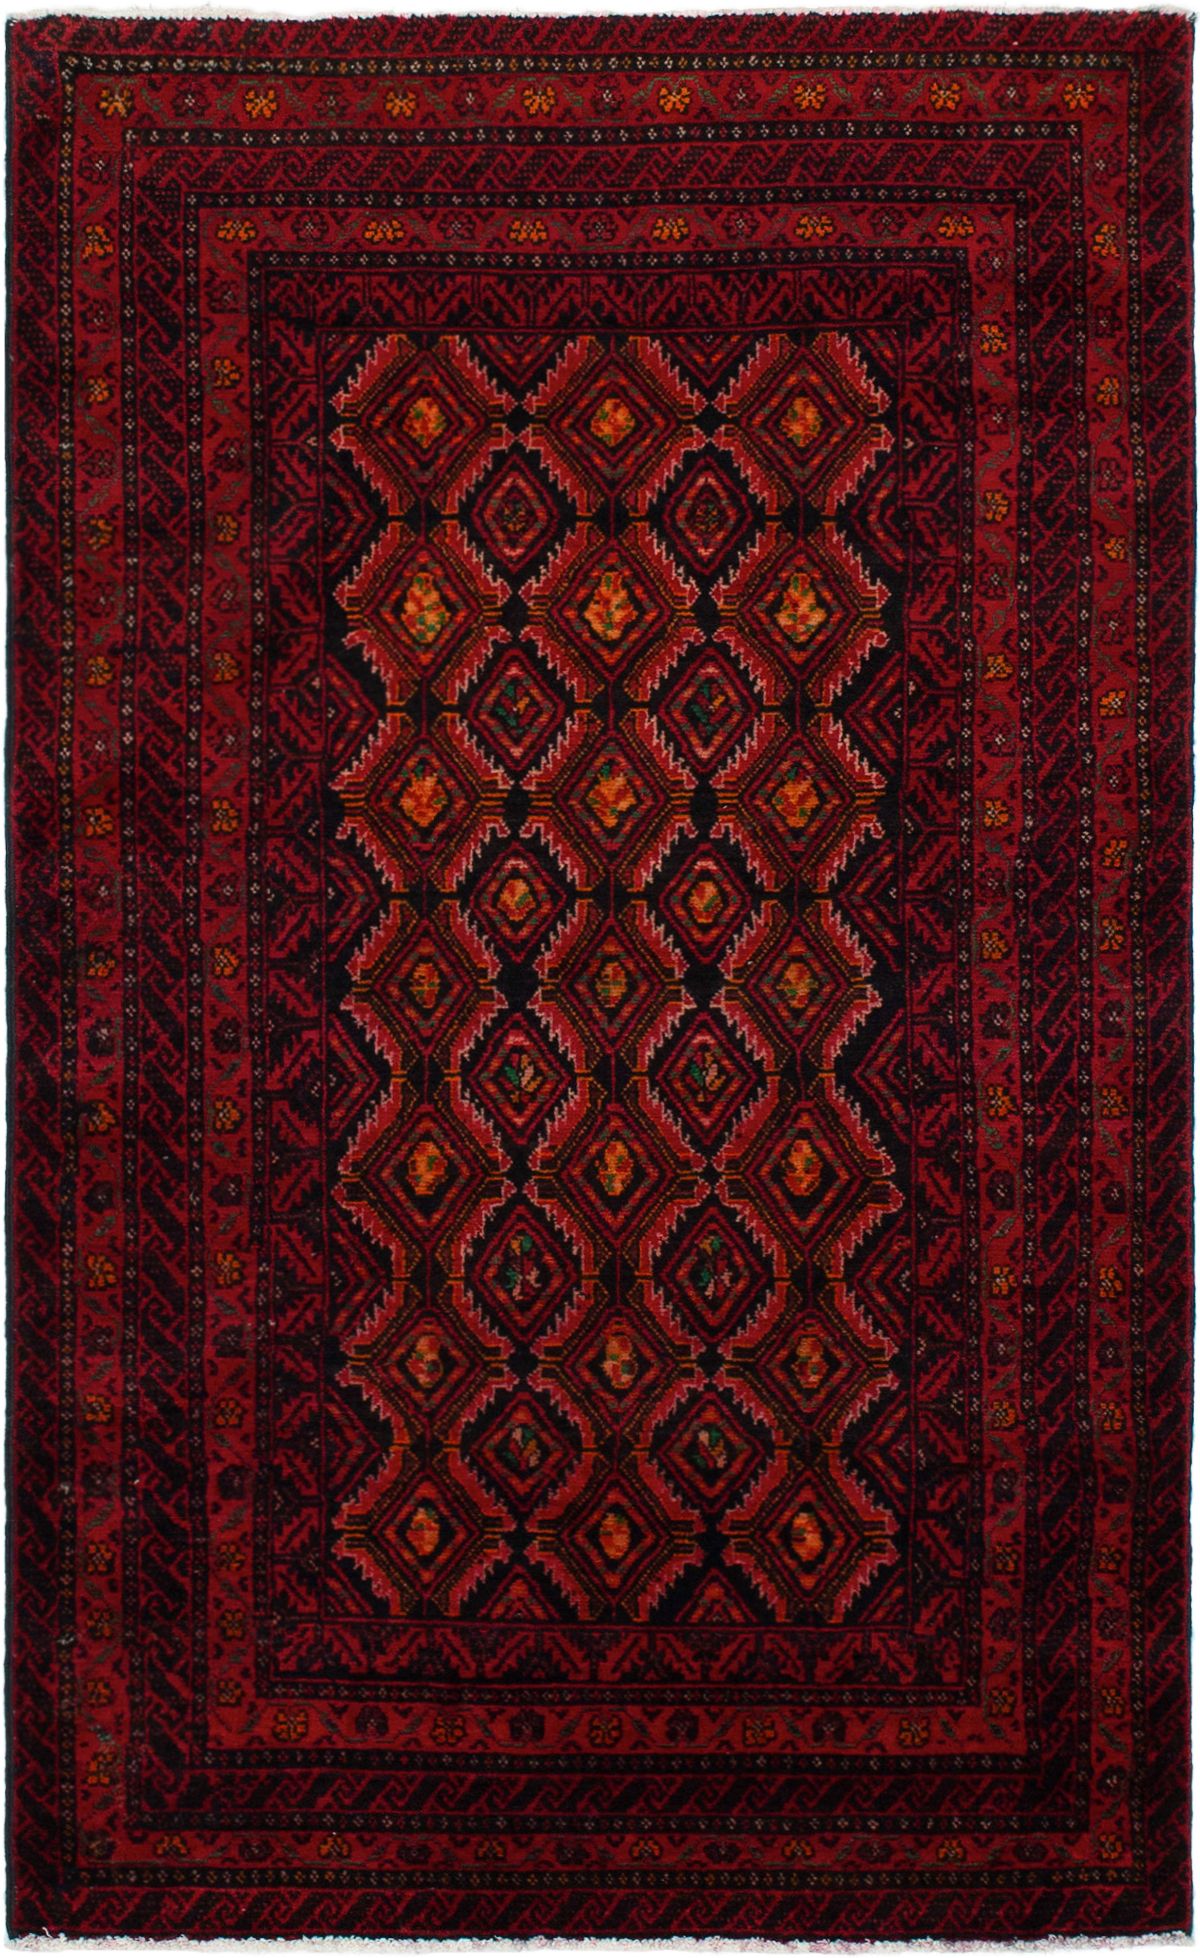 Hand-knotted Rizbaft Red Wool Rug 3'6" x 5'11"  Size: 3'6" x 5'11"  